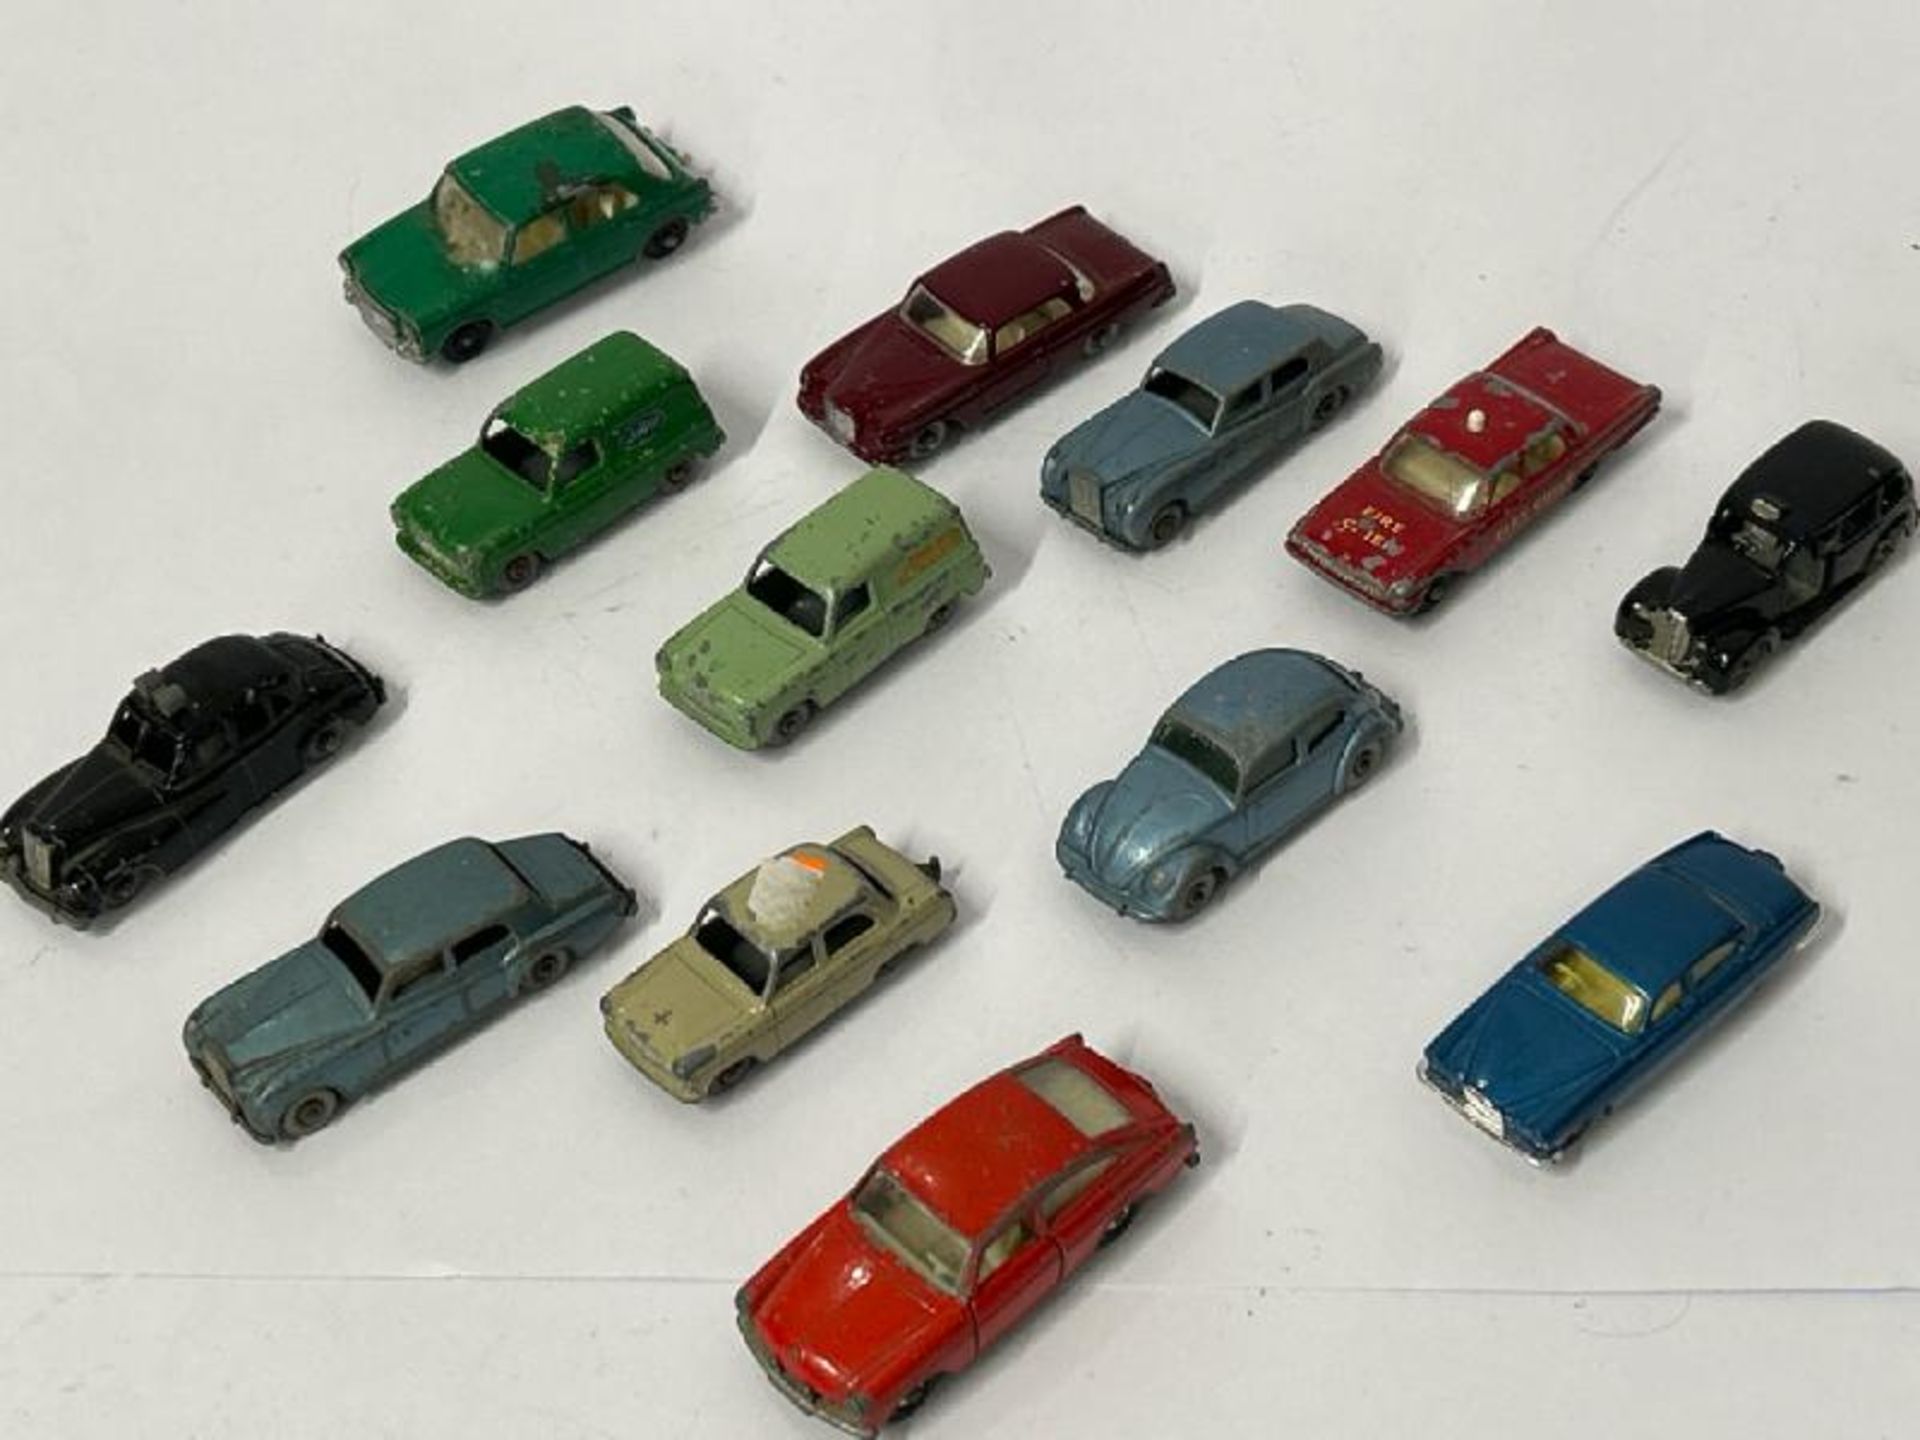 Unboxed Matchbox group including Volkswagen 1600TL no.67, Volkswagen Beatle no.25 and Ford Fire